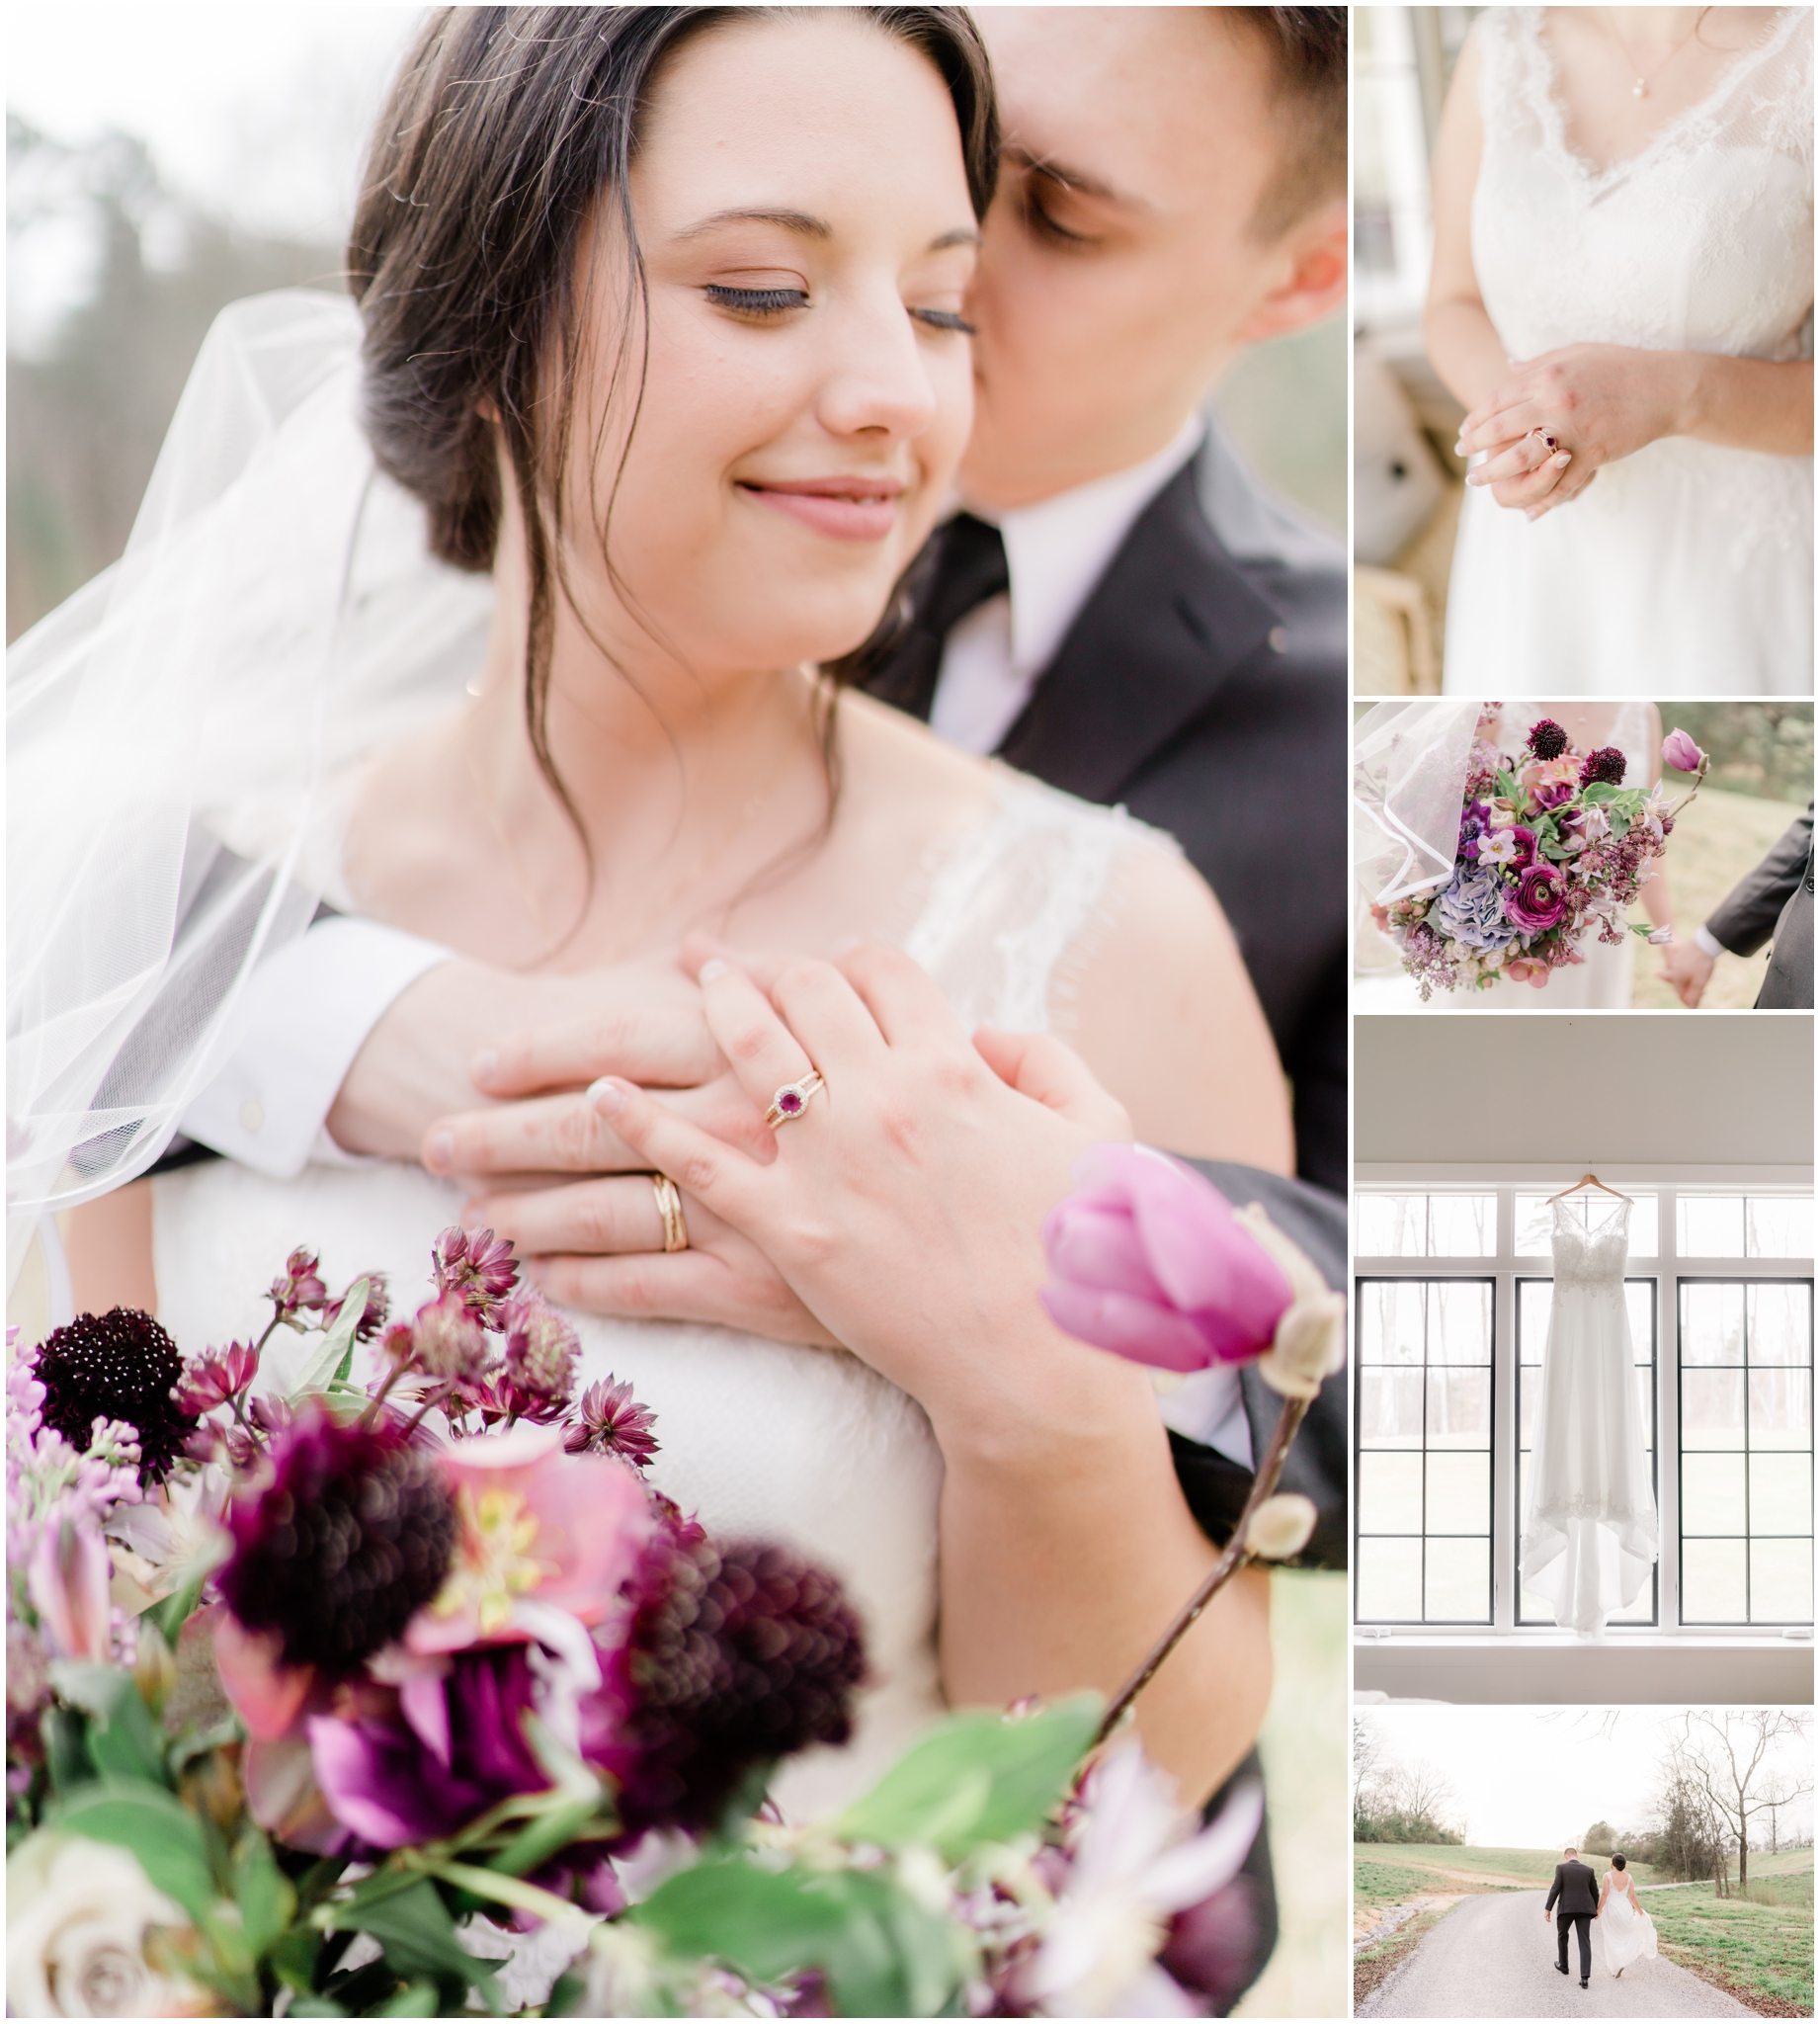 At Home Wedding for Laura & Robert by alyssa rachelle photography